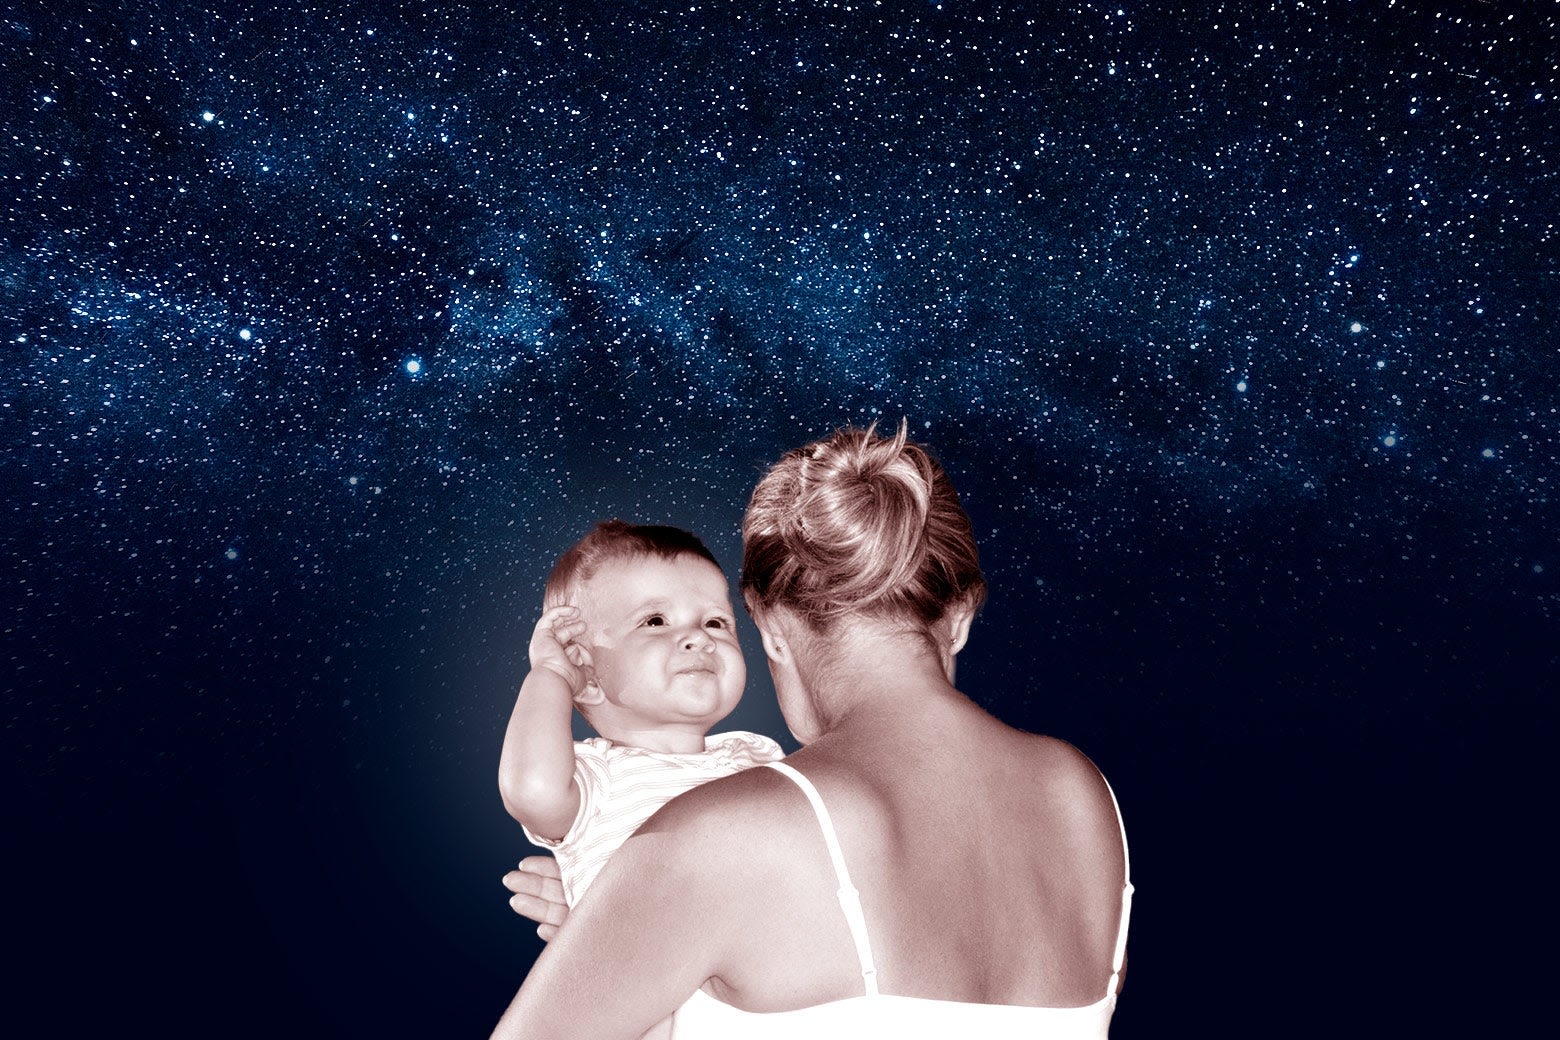 I Don’t Believe in Astrology. But Could Astrology Help Me With Parenting?